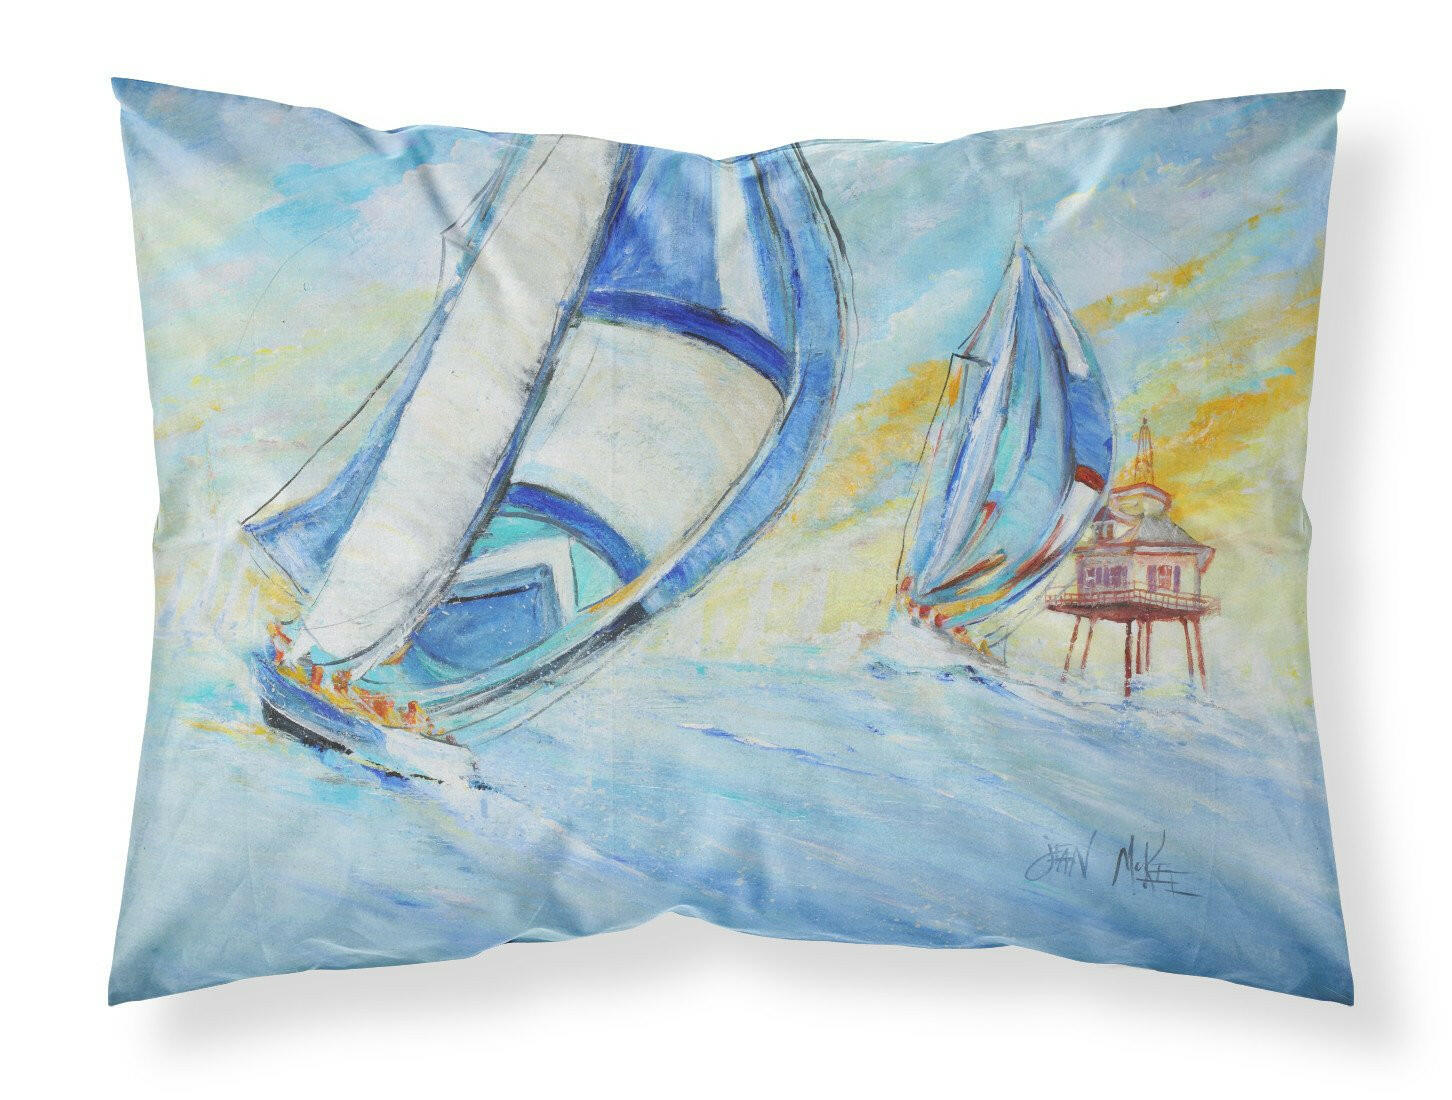 Sailboats and Middle Bay Lighthouse Fabric Standard Pillowcase JMK1005PILLOWCASE by Caroline's Treasures